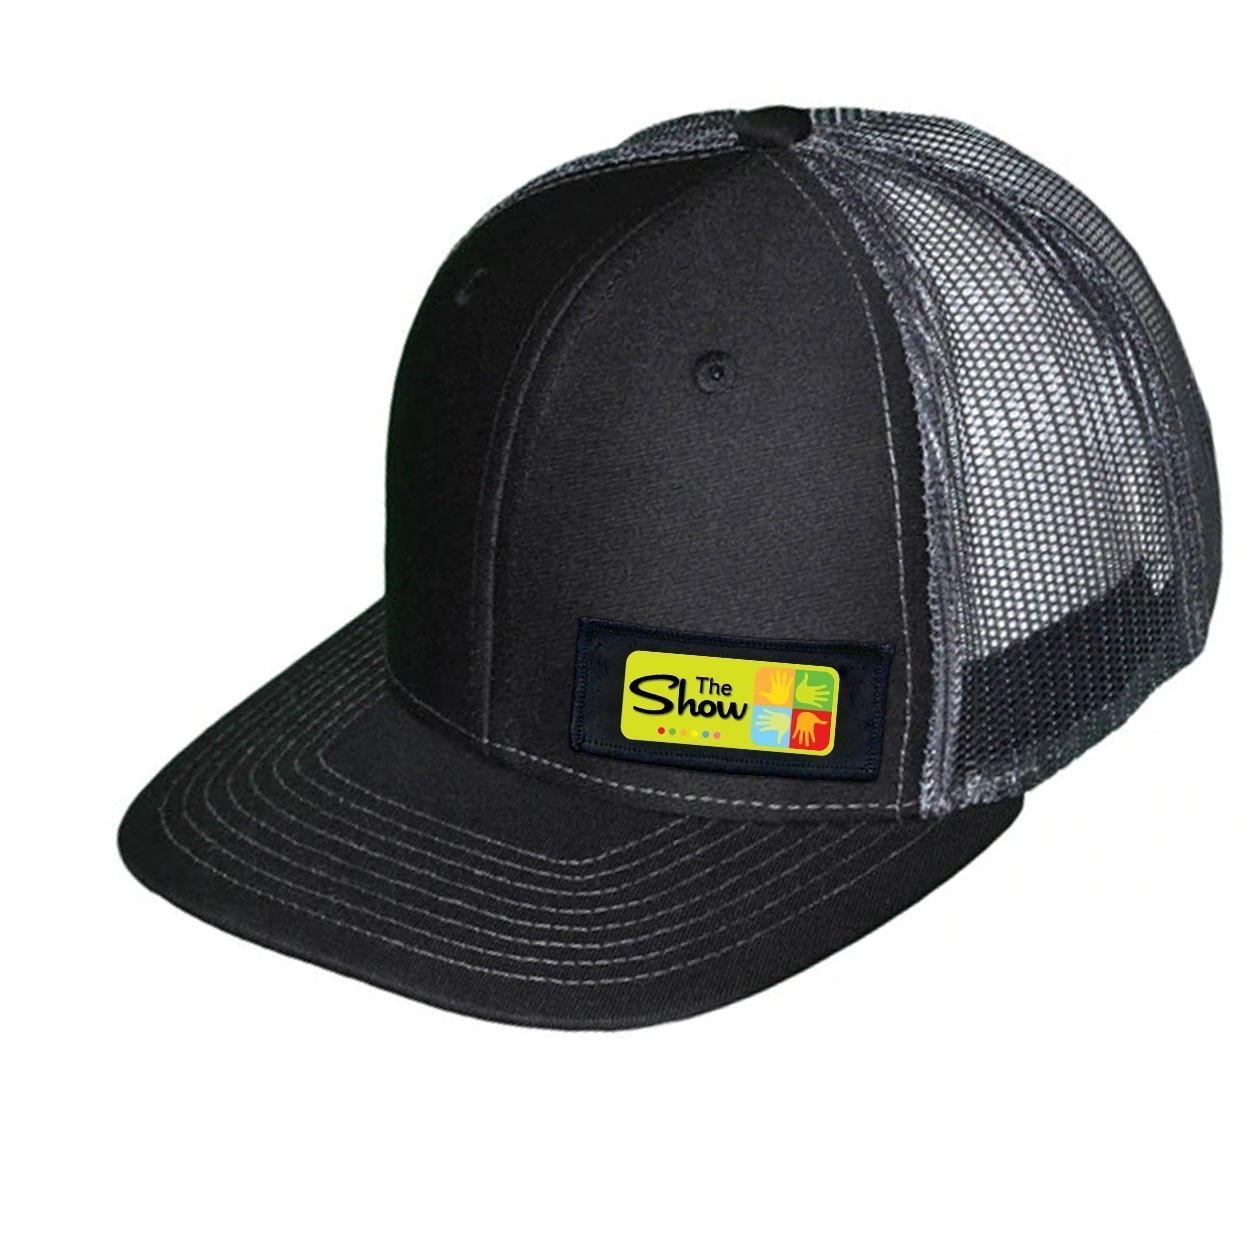 The Show Art Gallery Night Out Woven Patch Snapback Trucker Hat Black/Dark Gray (White Logo)